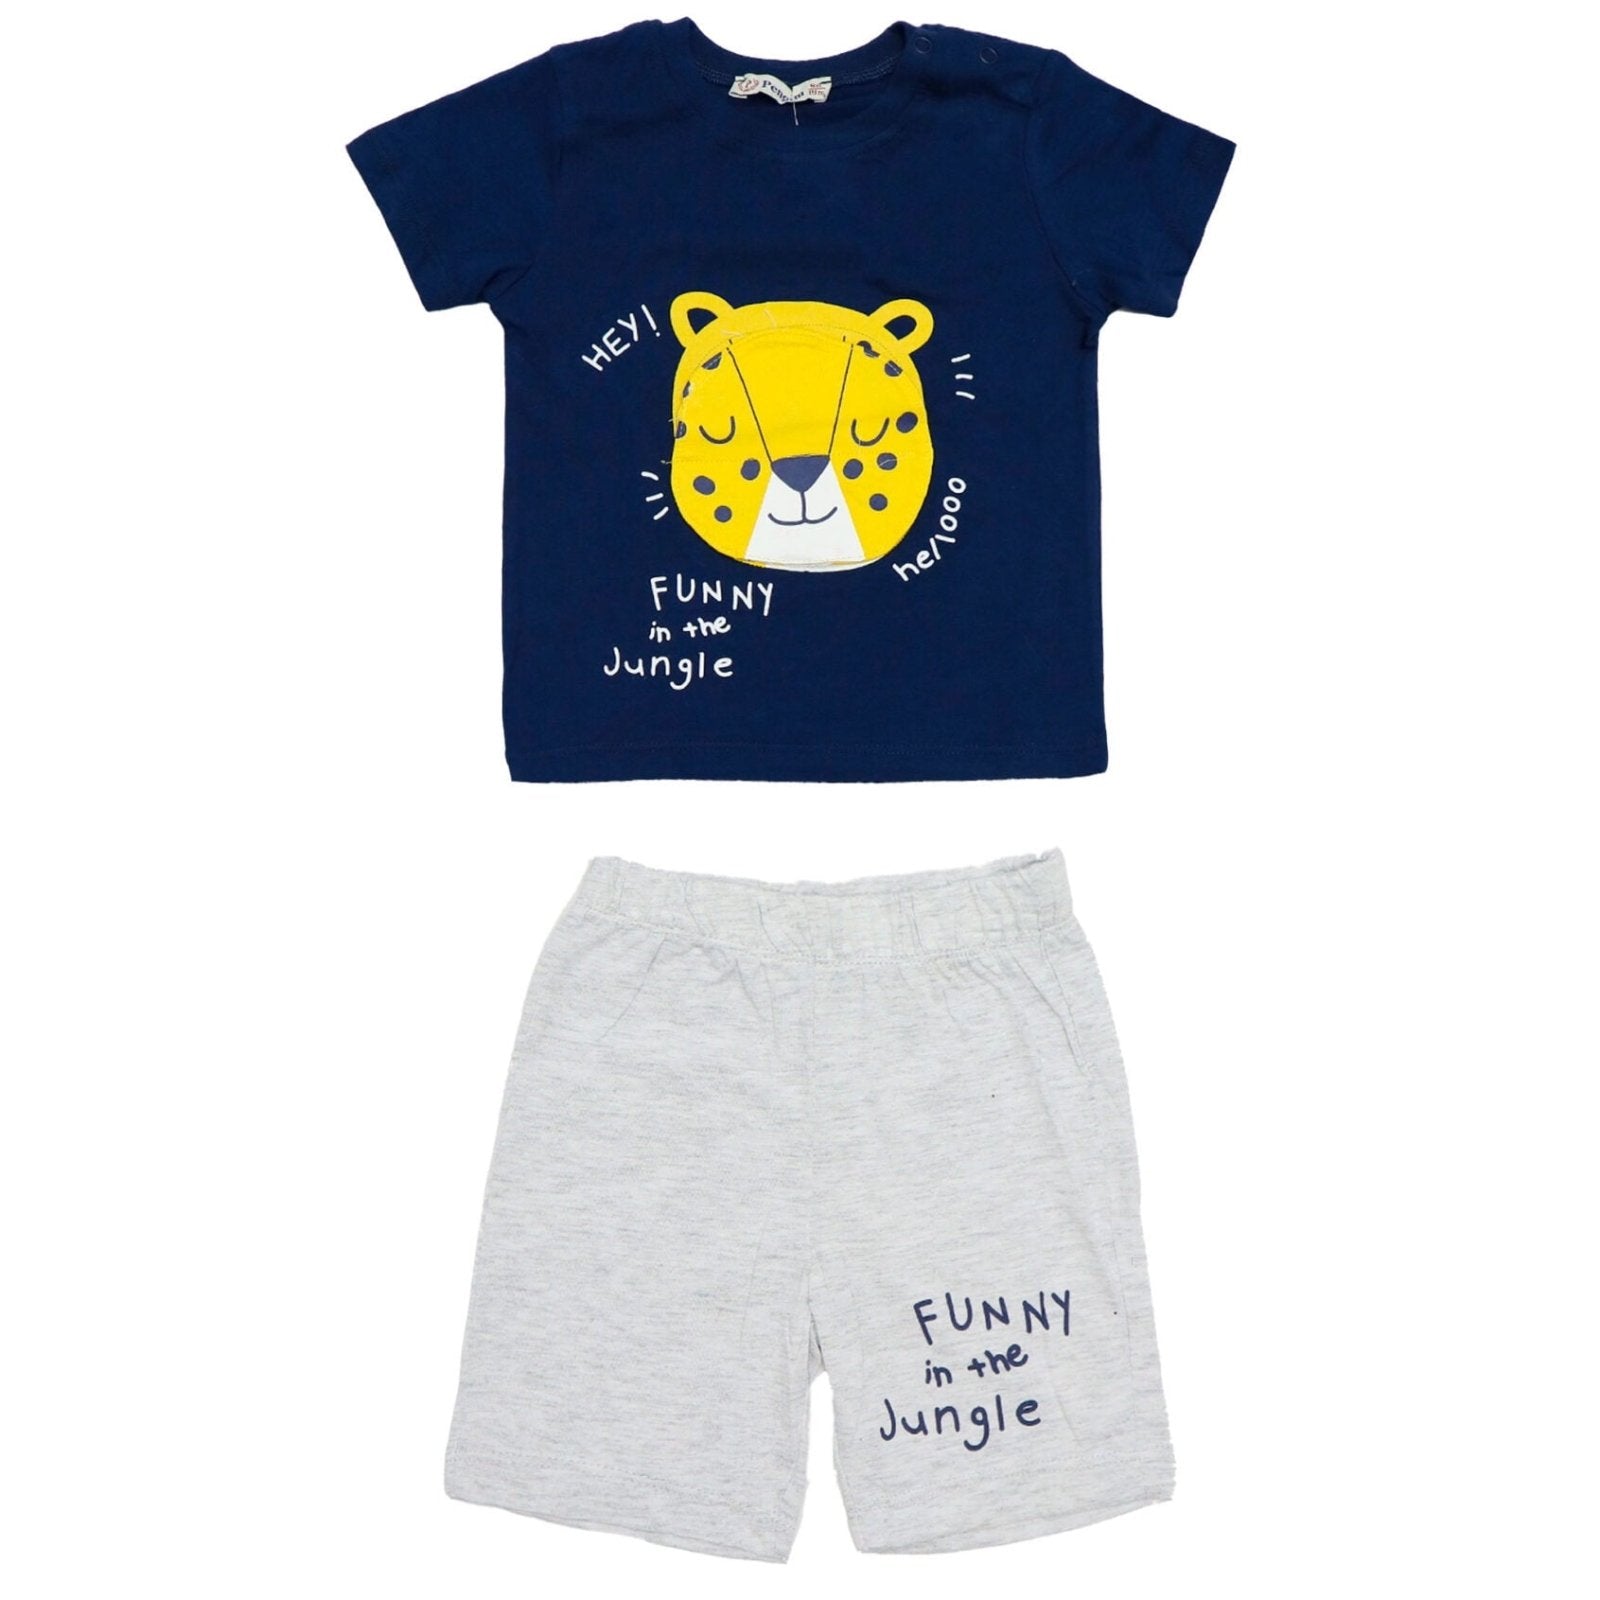 Boys Suit Funny In The Jungle | Made In Turkey - Zubaidas Mothershop